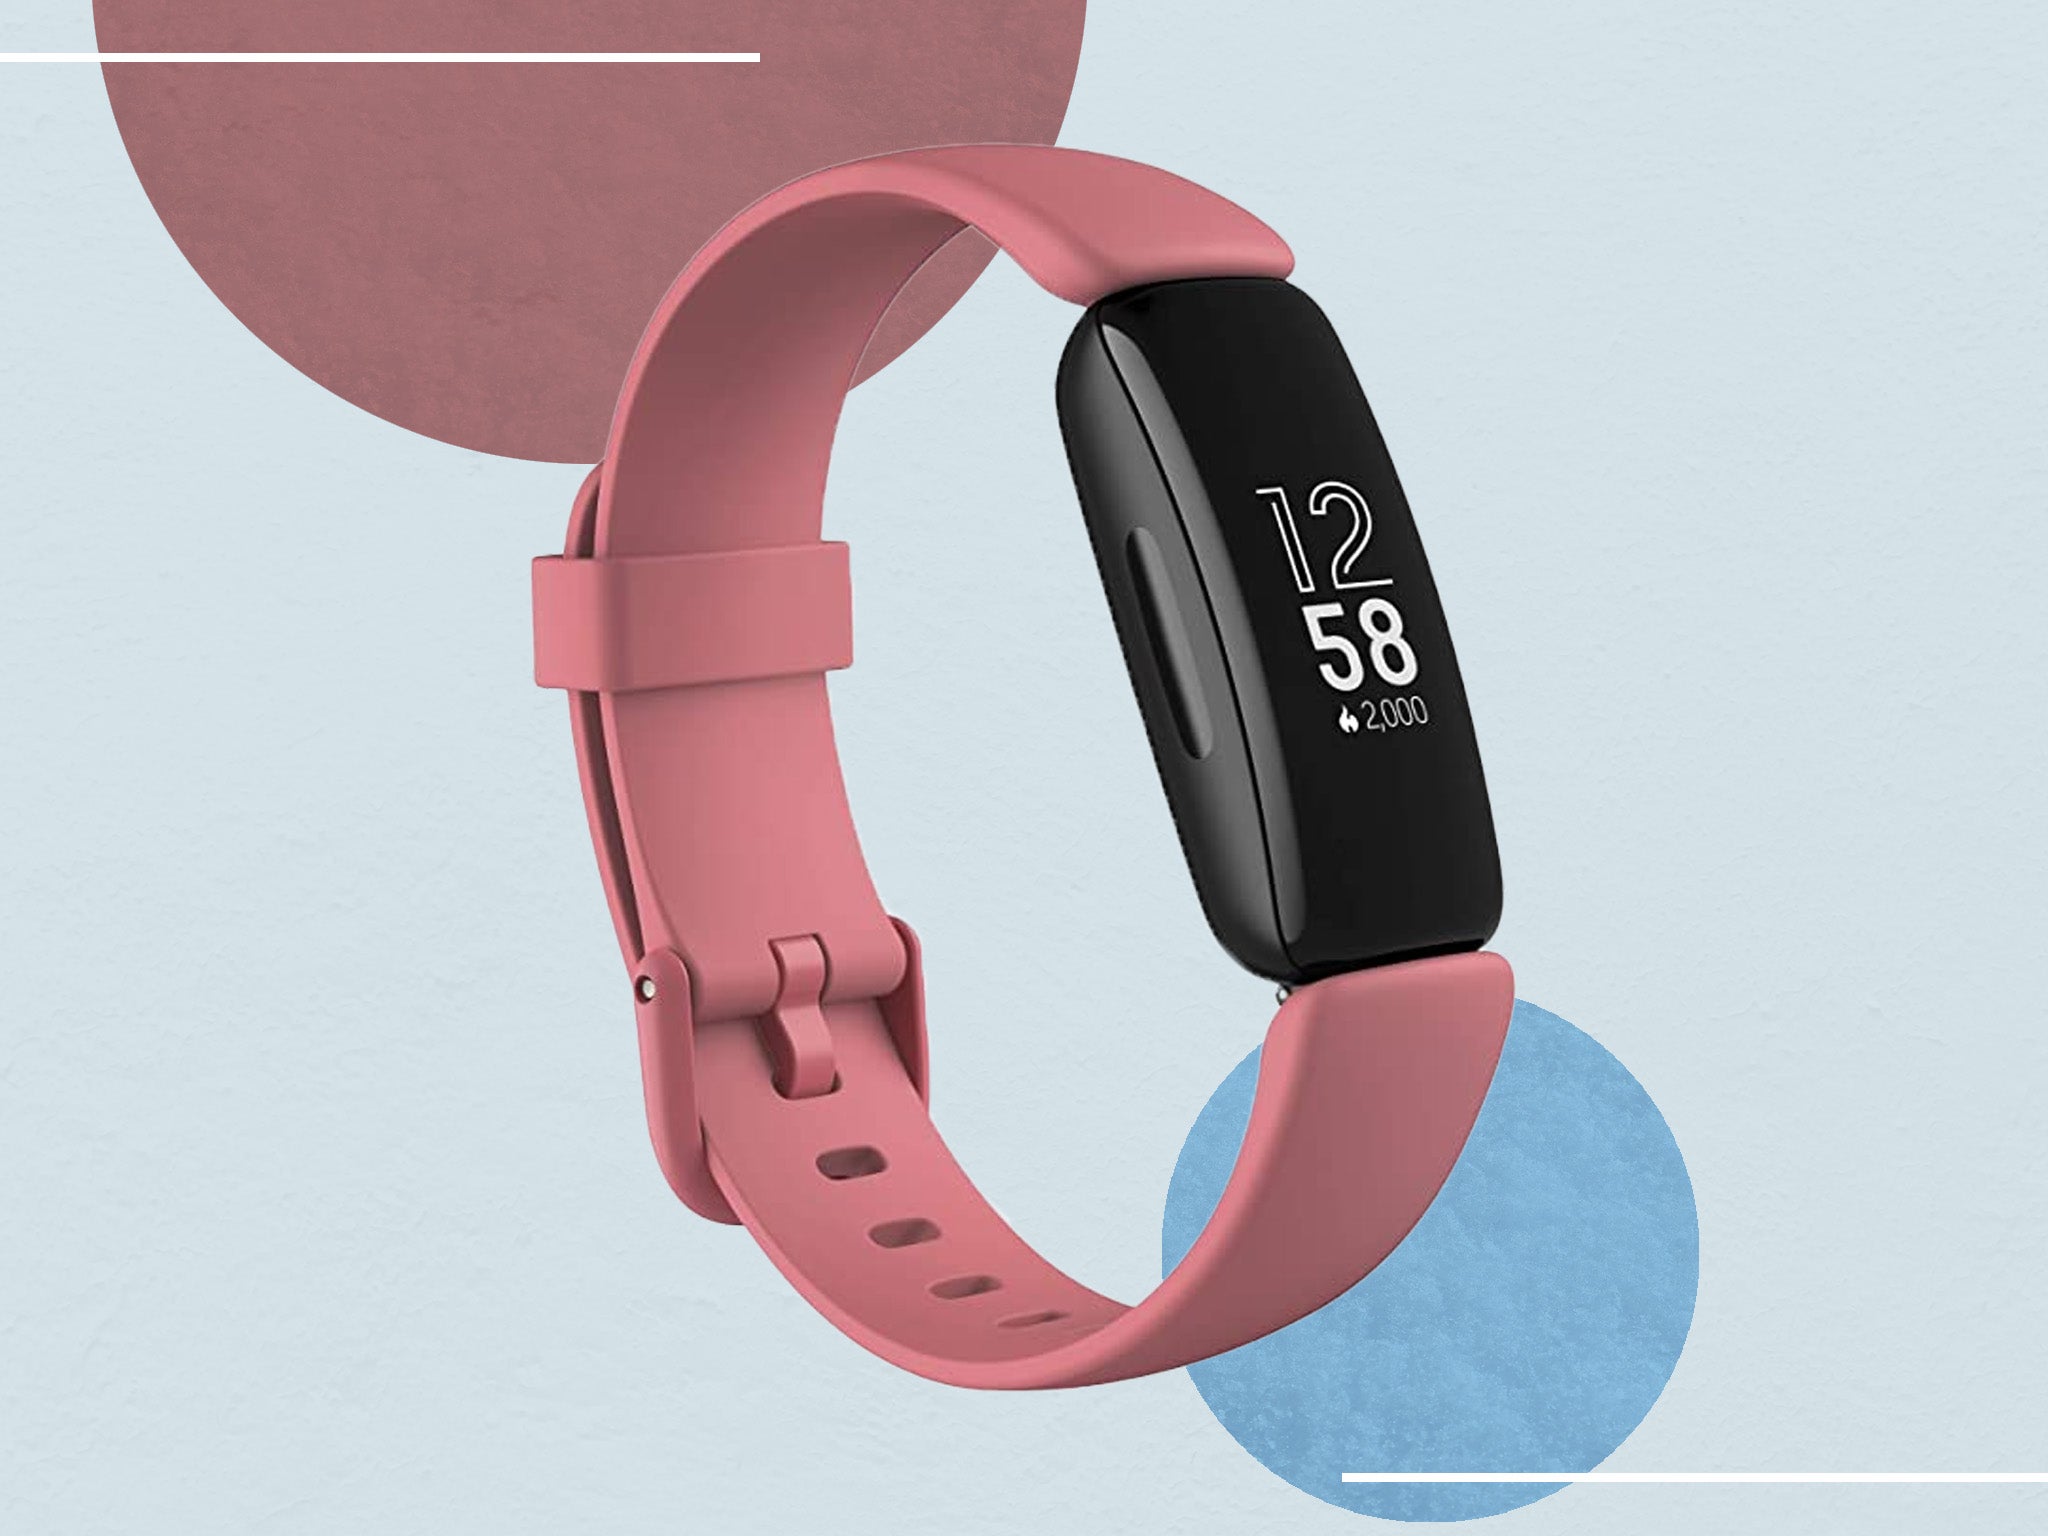 The fitness tracker is now half price